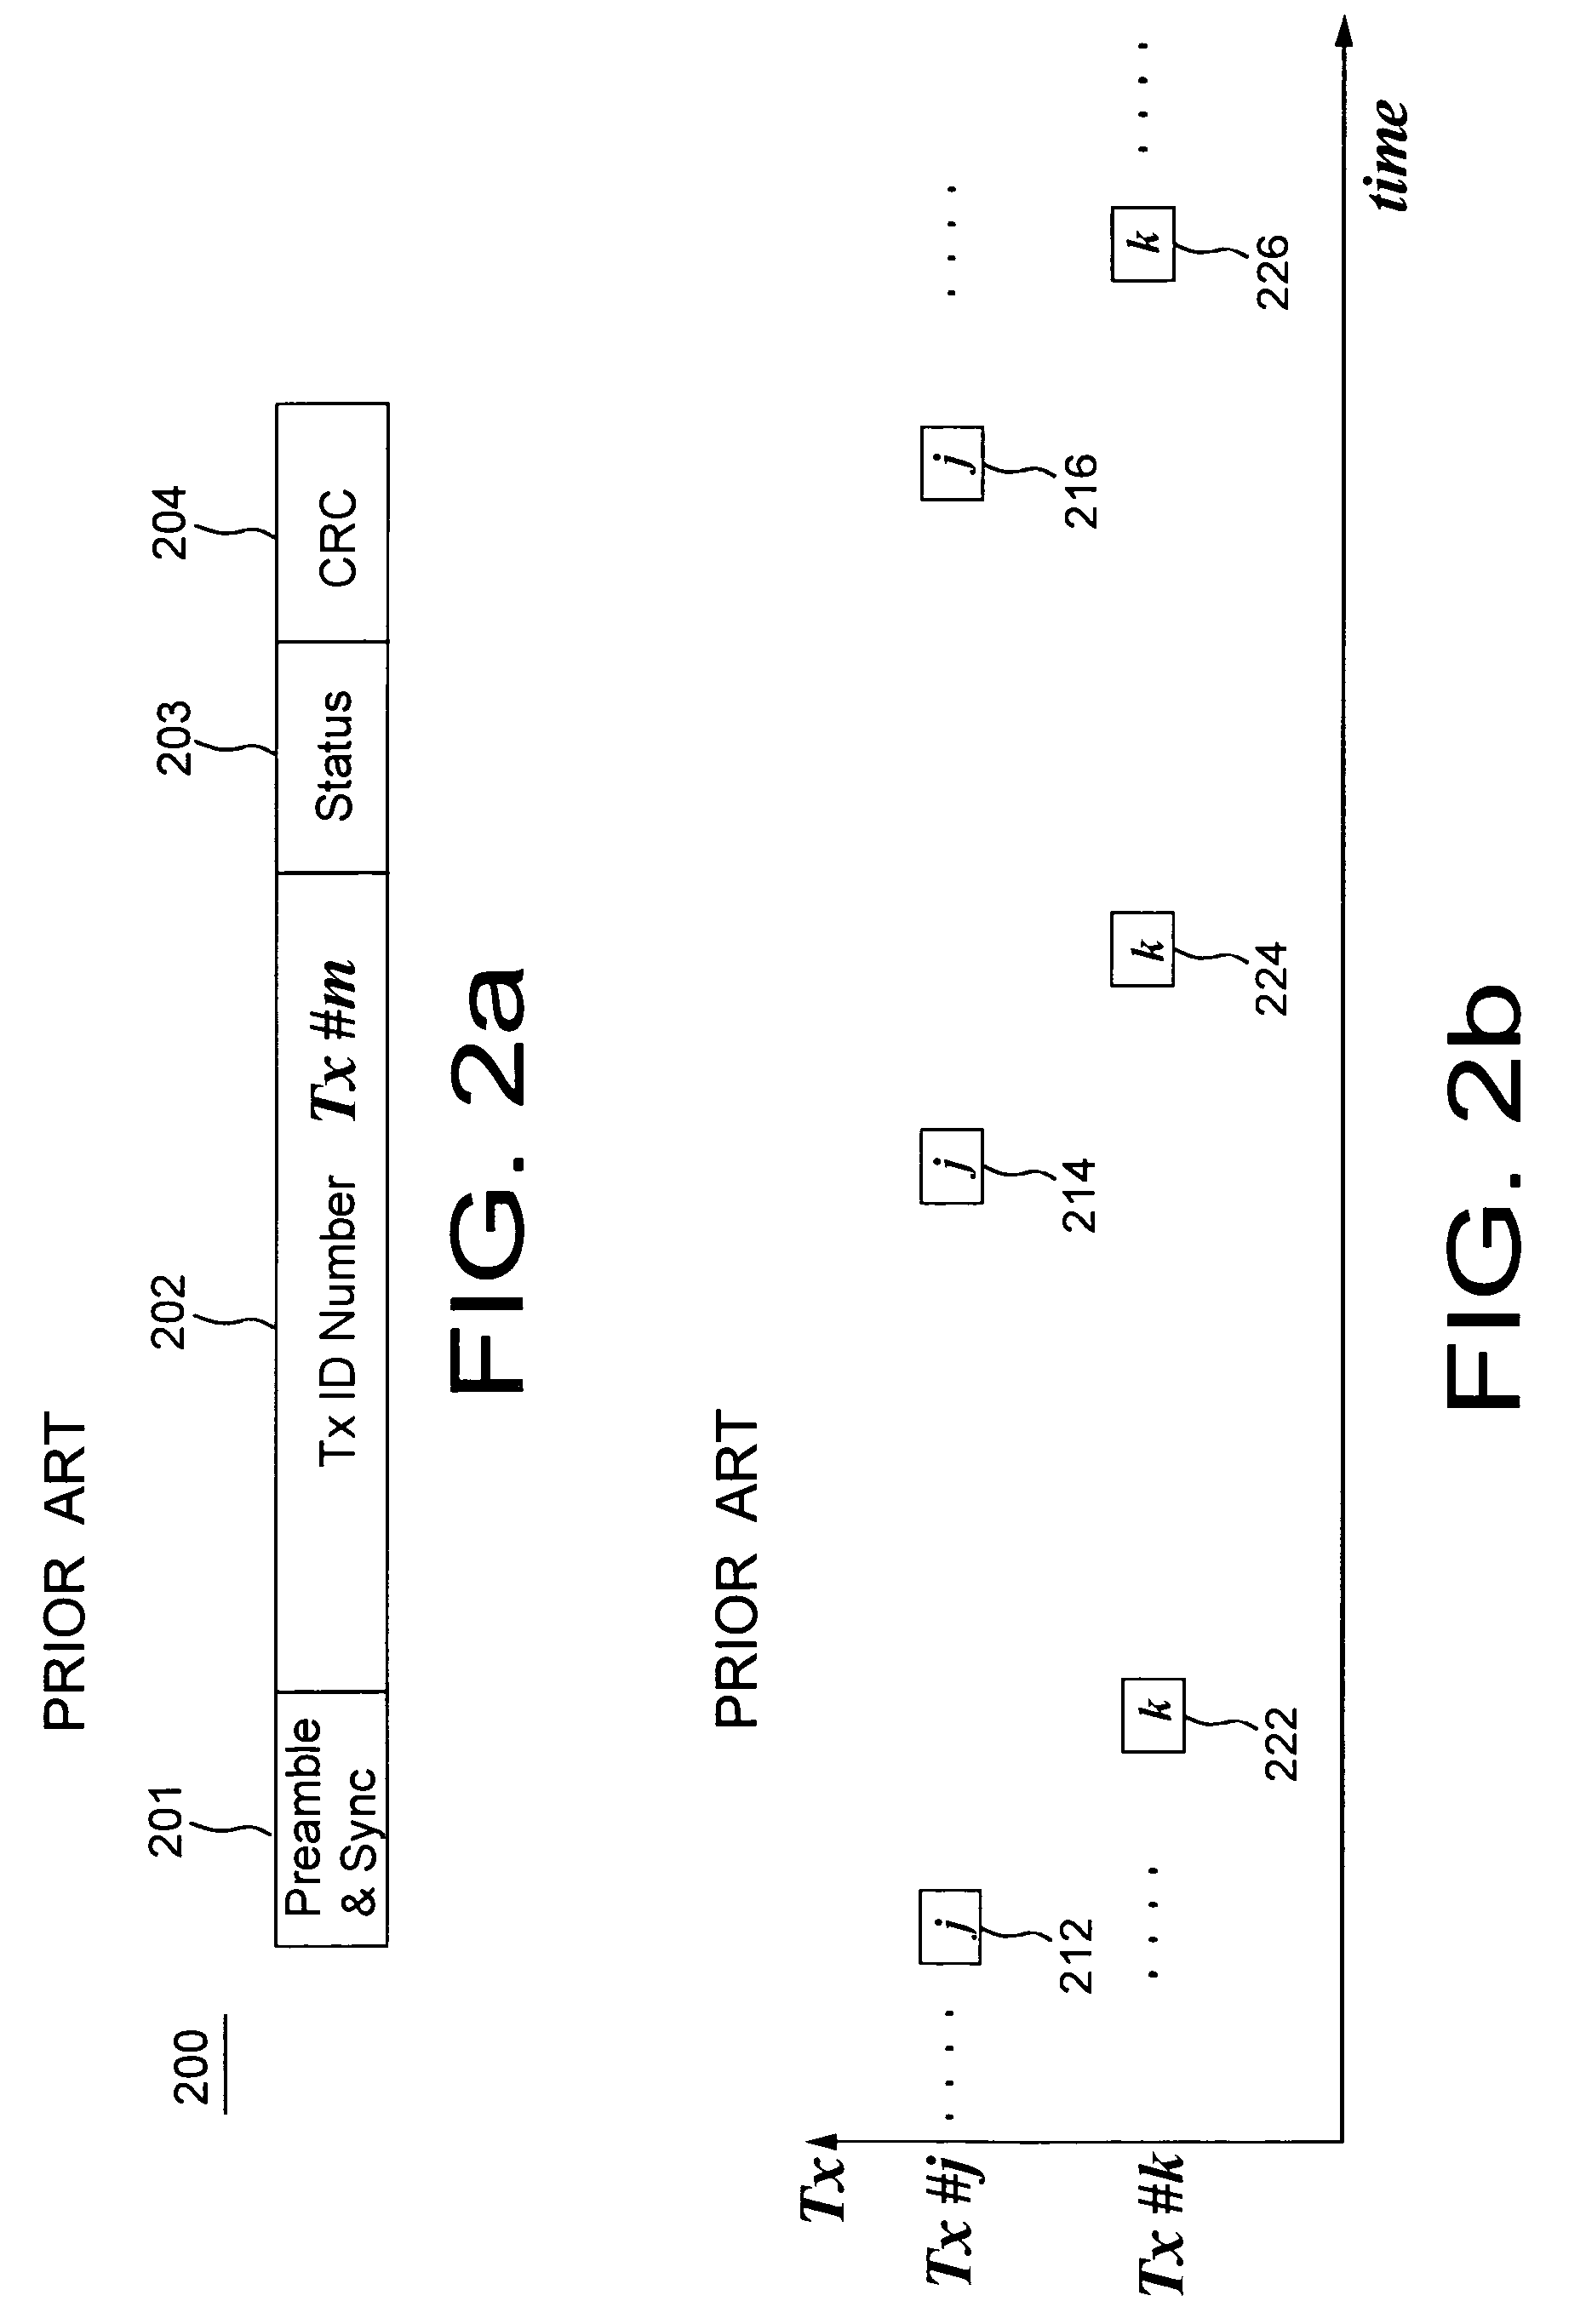 Overhead reduction in frequency hopping system for intermittent transmission